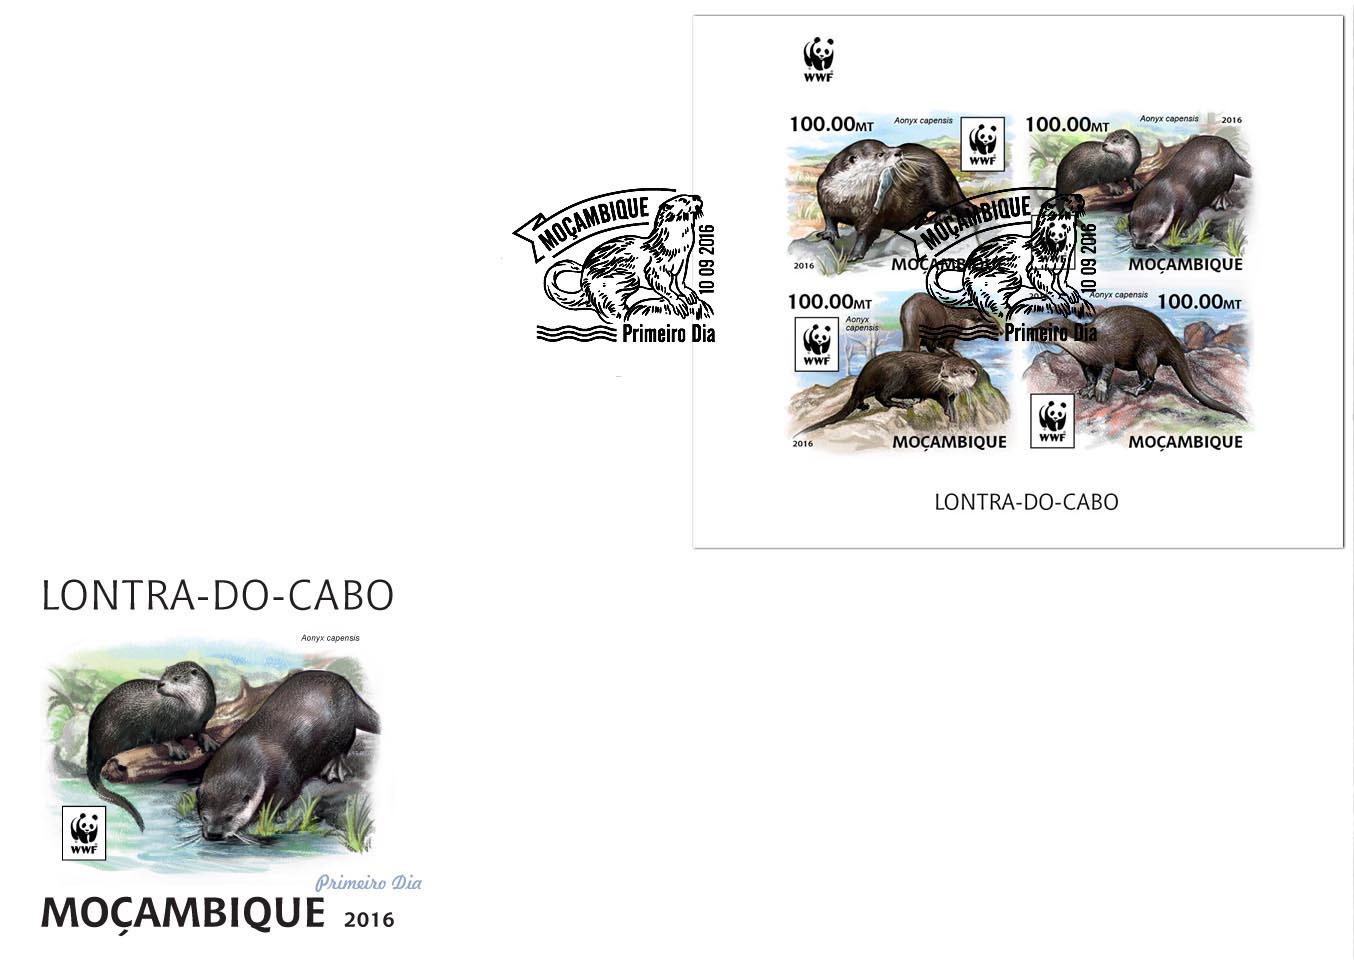 WWF – Otter (FDC imperf.) - Issue of Mozambique postage Stamps